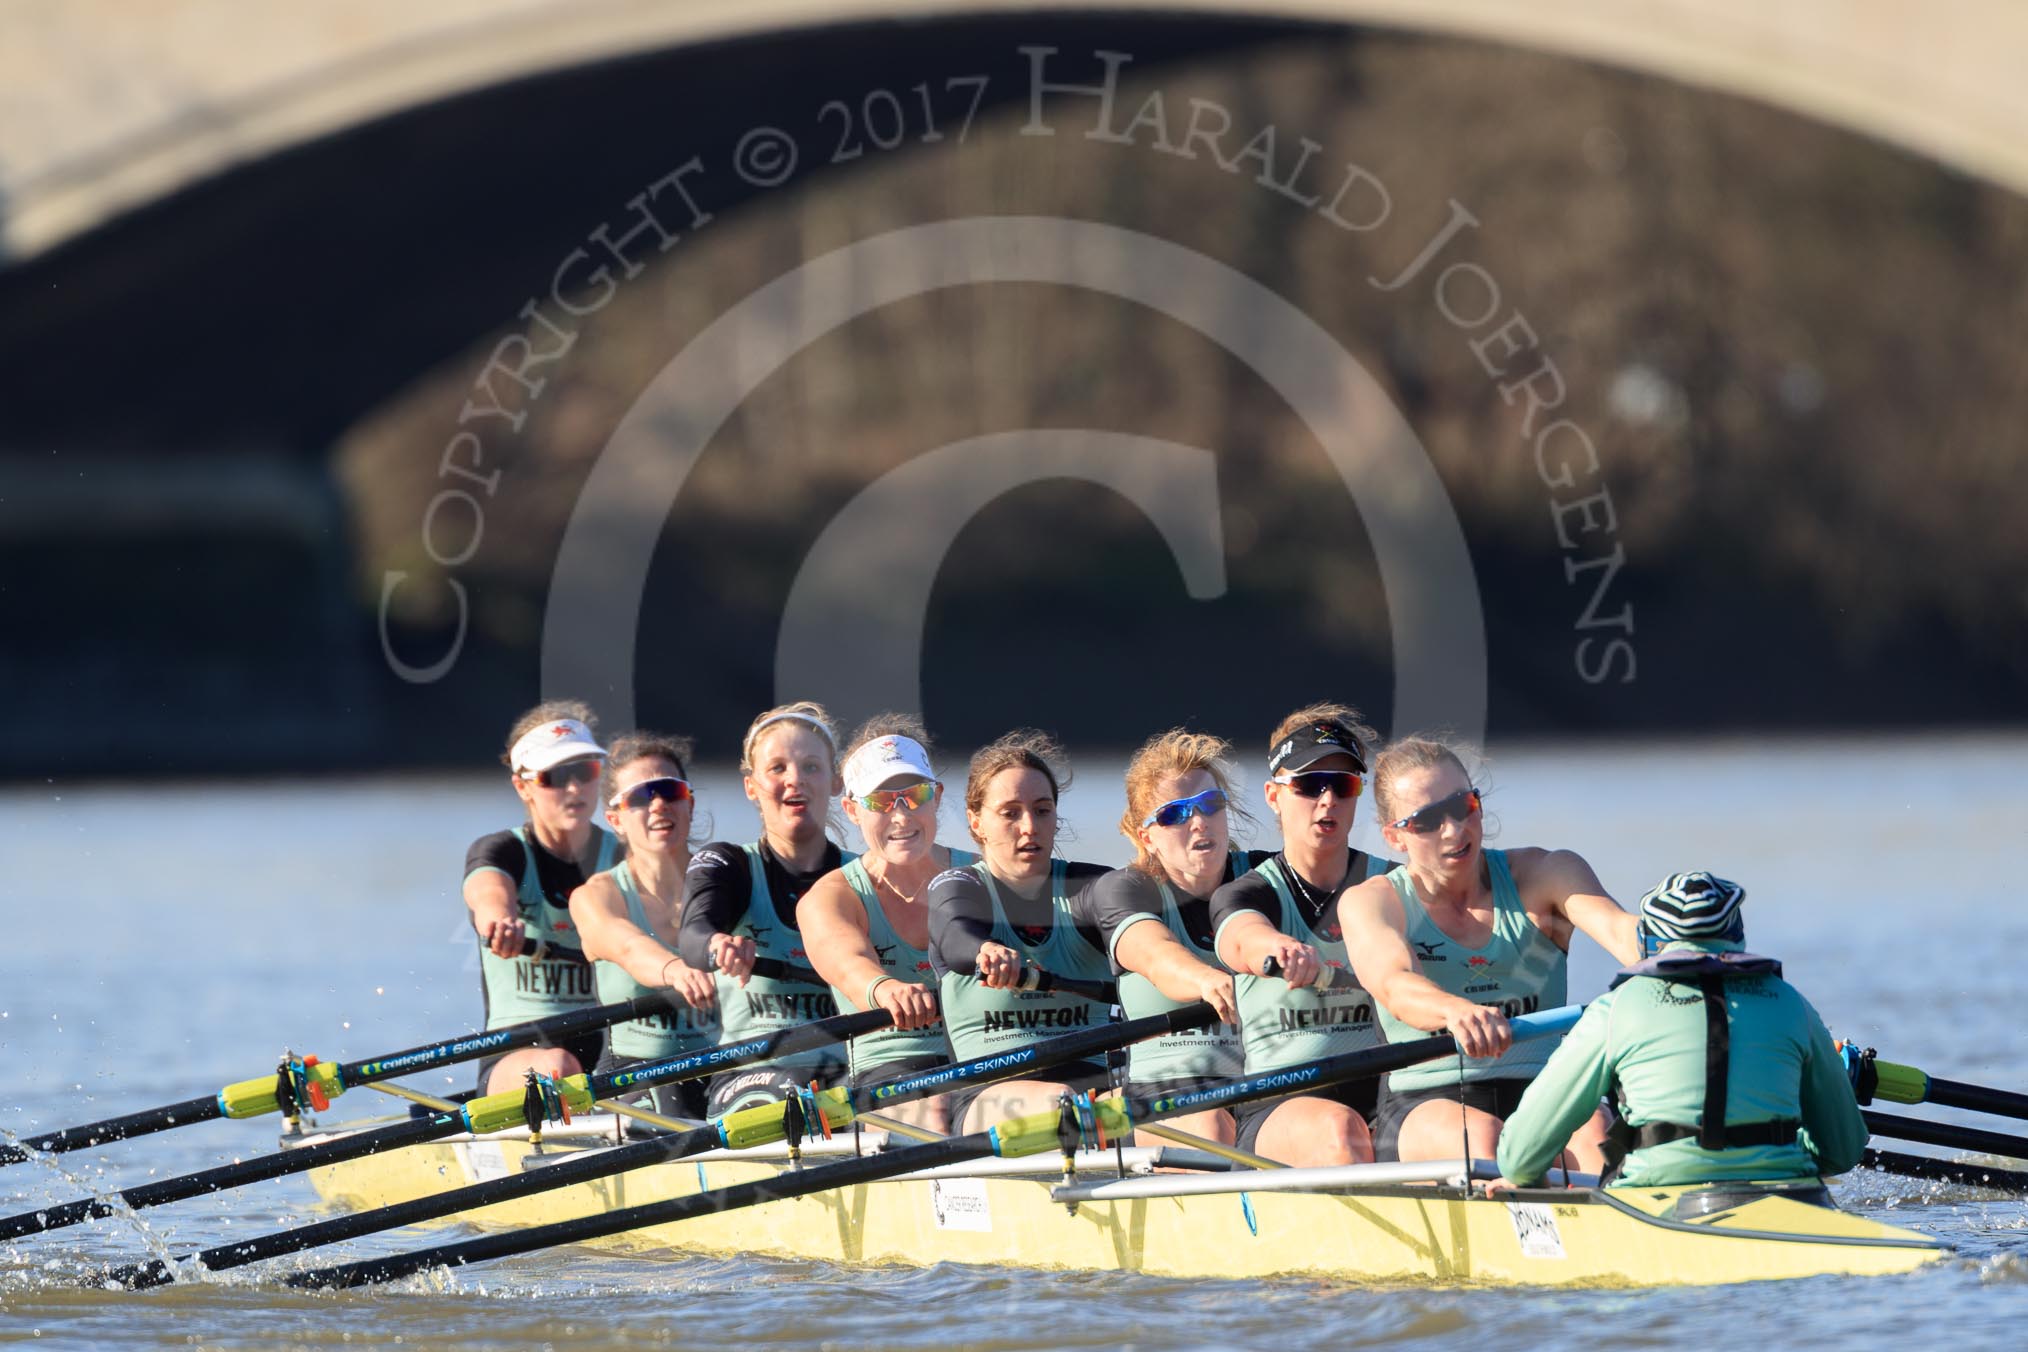 The Women's Boat Race season 2018 - fixture CUWBC vs. ULBC: The CUWBC Eight getting closer to the finish at Chiswick Bridge - bow Olivia Coffey, 2 Myriam Goudet-Boukhatmi, 3 Alice White, 4 Paula Wesselmann, 5 Thea Zabell, 6 Anne Beenken, 7 Imogen Grant, stroke Tricia Smith, cox Sophie Shapter.
River Thames between Putney Bridge and Mortlake,
London SW15,

United Kingdom,
on 17 February 2018 at 13:34, image #157